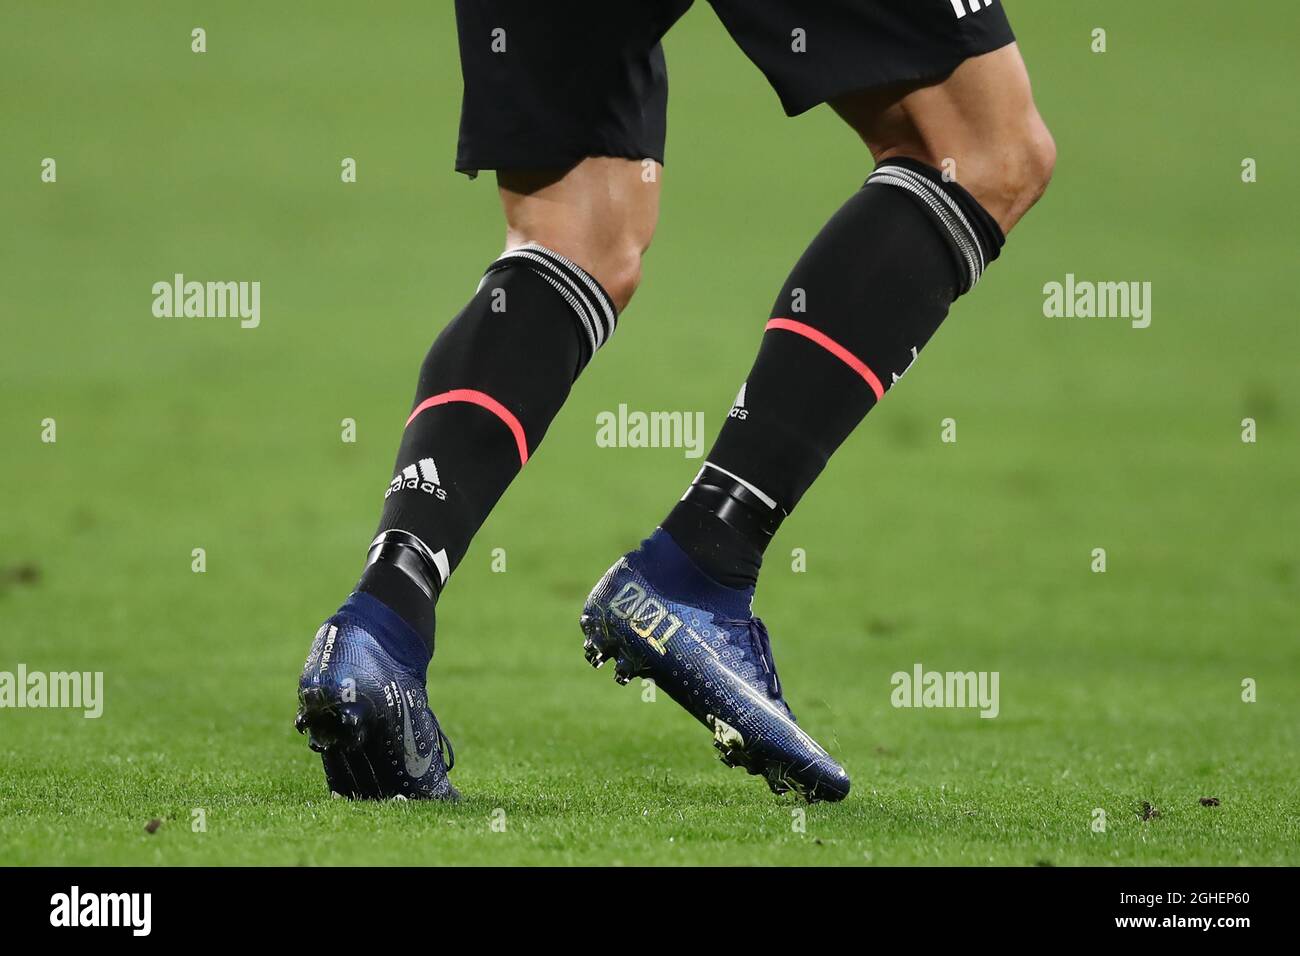 Cristiano Ronaldo of Juventus models a new version of Nike Mercurial during the UEFA Champions League match at Juventus Stadium, Turin. Picture date: 1st October 2019. Picture credit should read: Moscrop/Sportimage